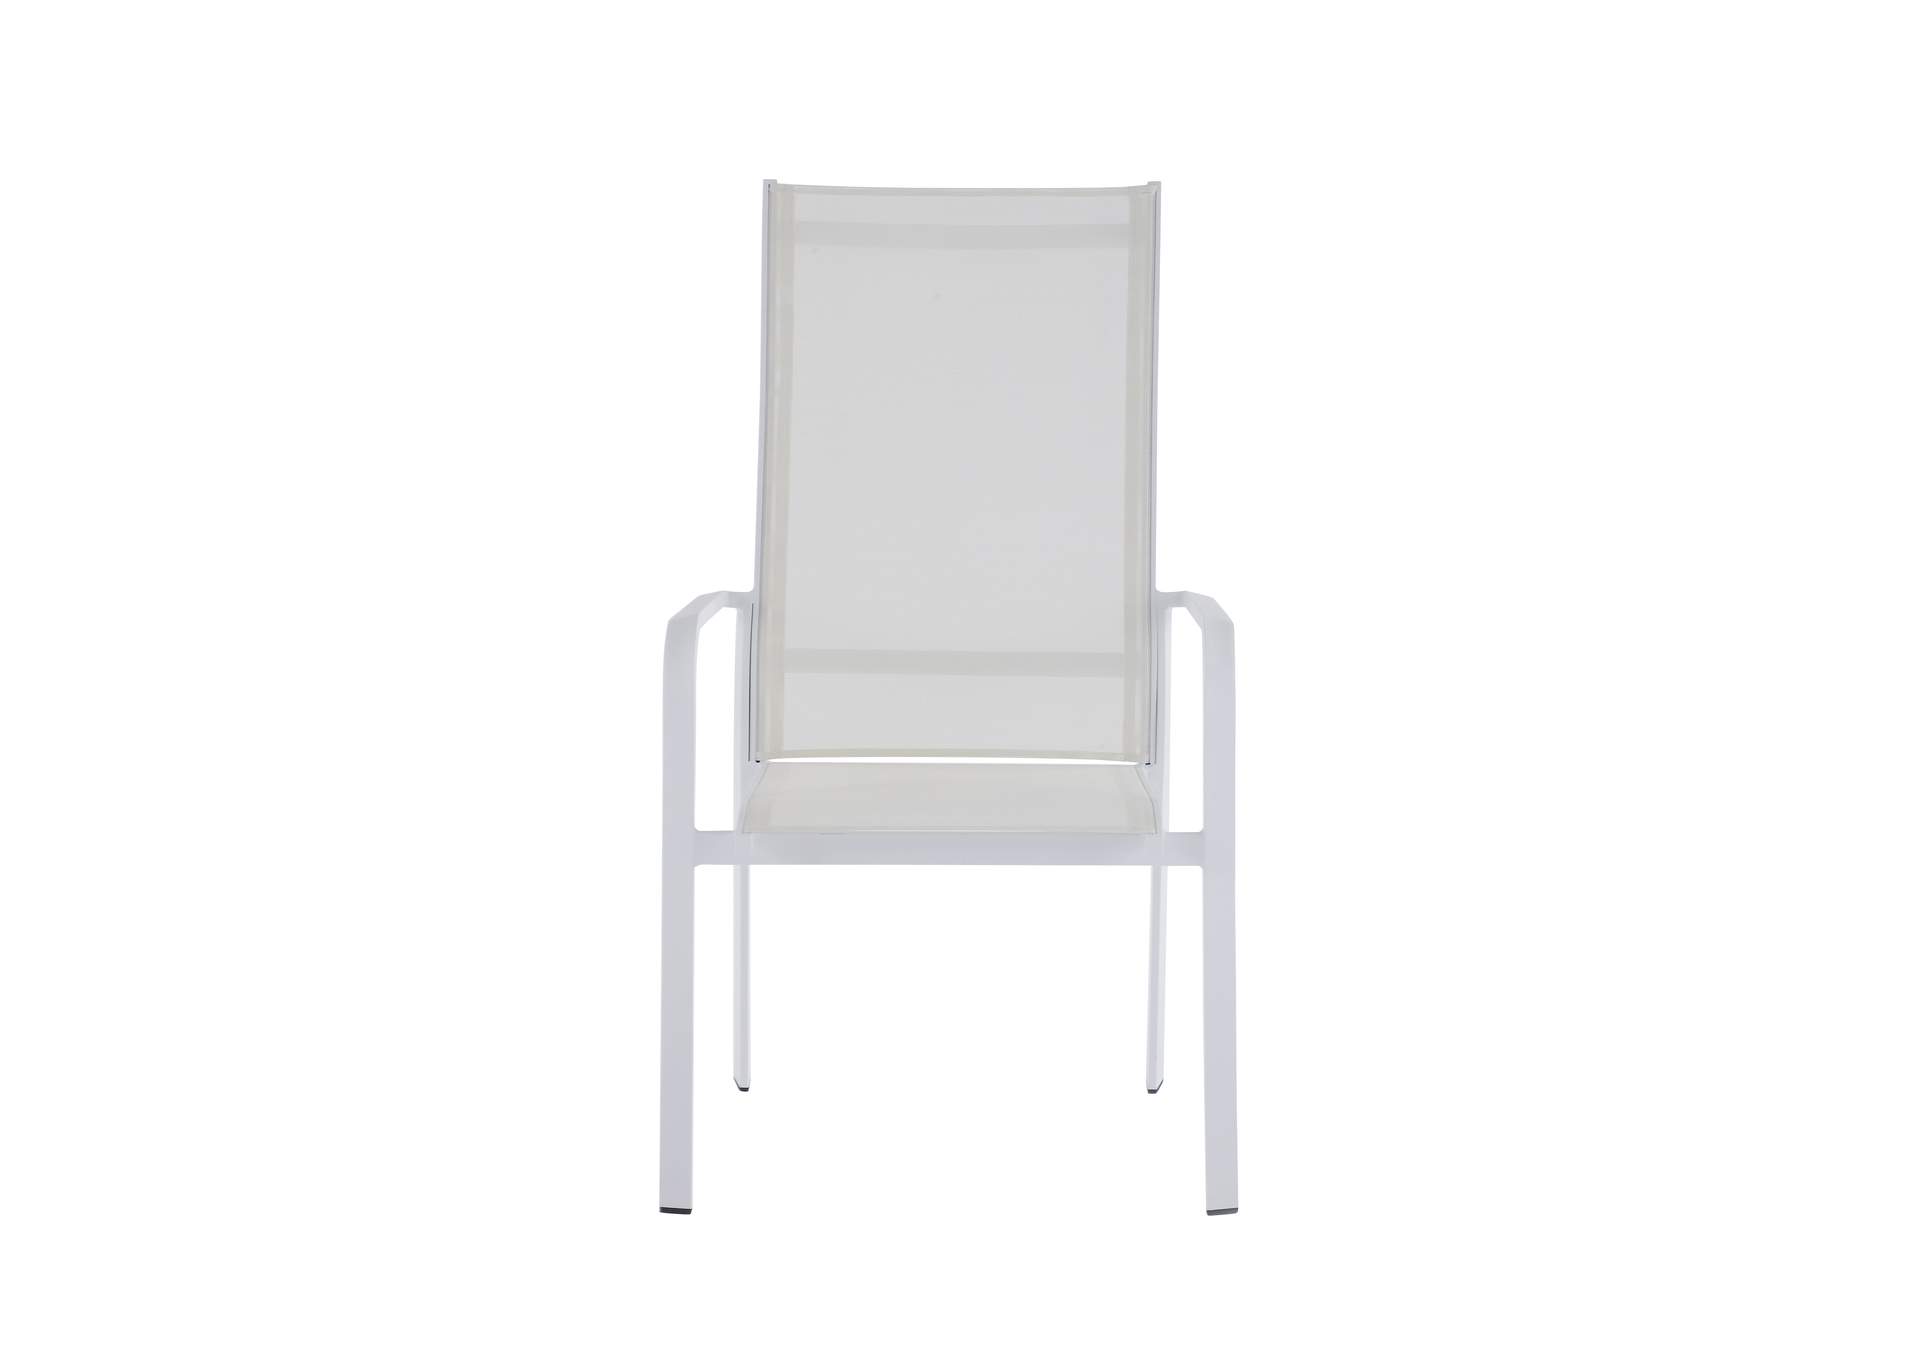 Contemporary High Back Outdoor Chair with Sling Seat,Chintaly Imports